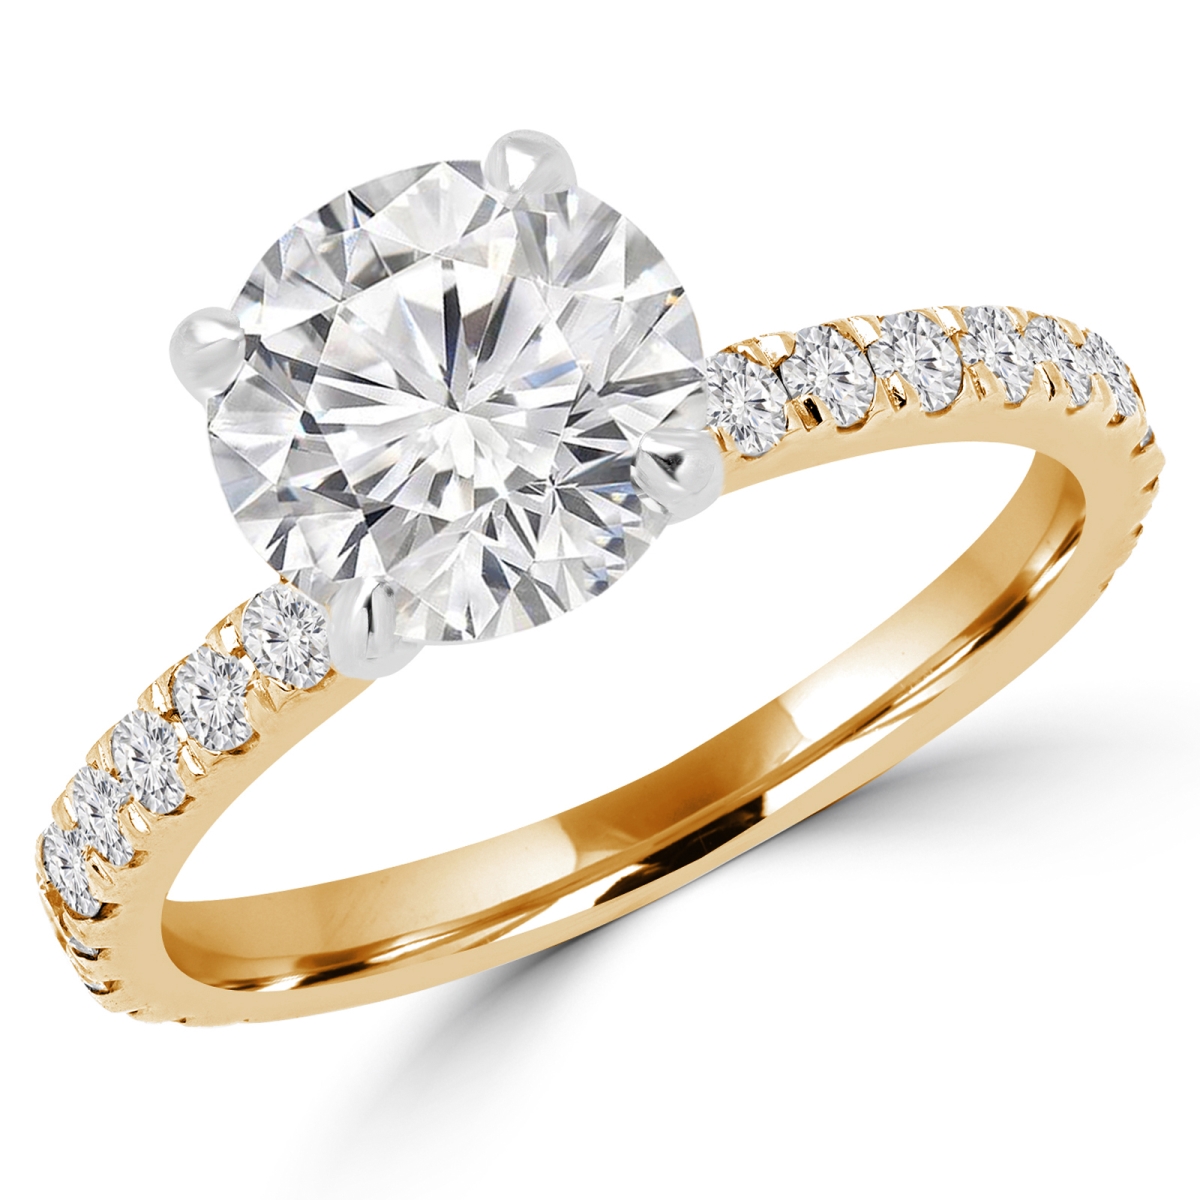 Picture of Majesty Diamonds MD160340-8 1 CTW Round Cut Diamond Multi Stone Engagement Ring in 14K Yellow Gold - Size 8